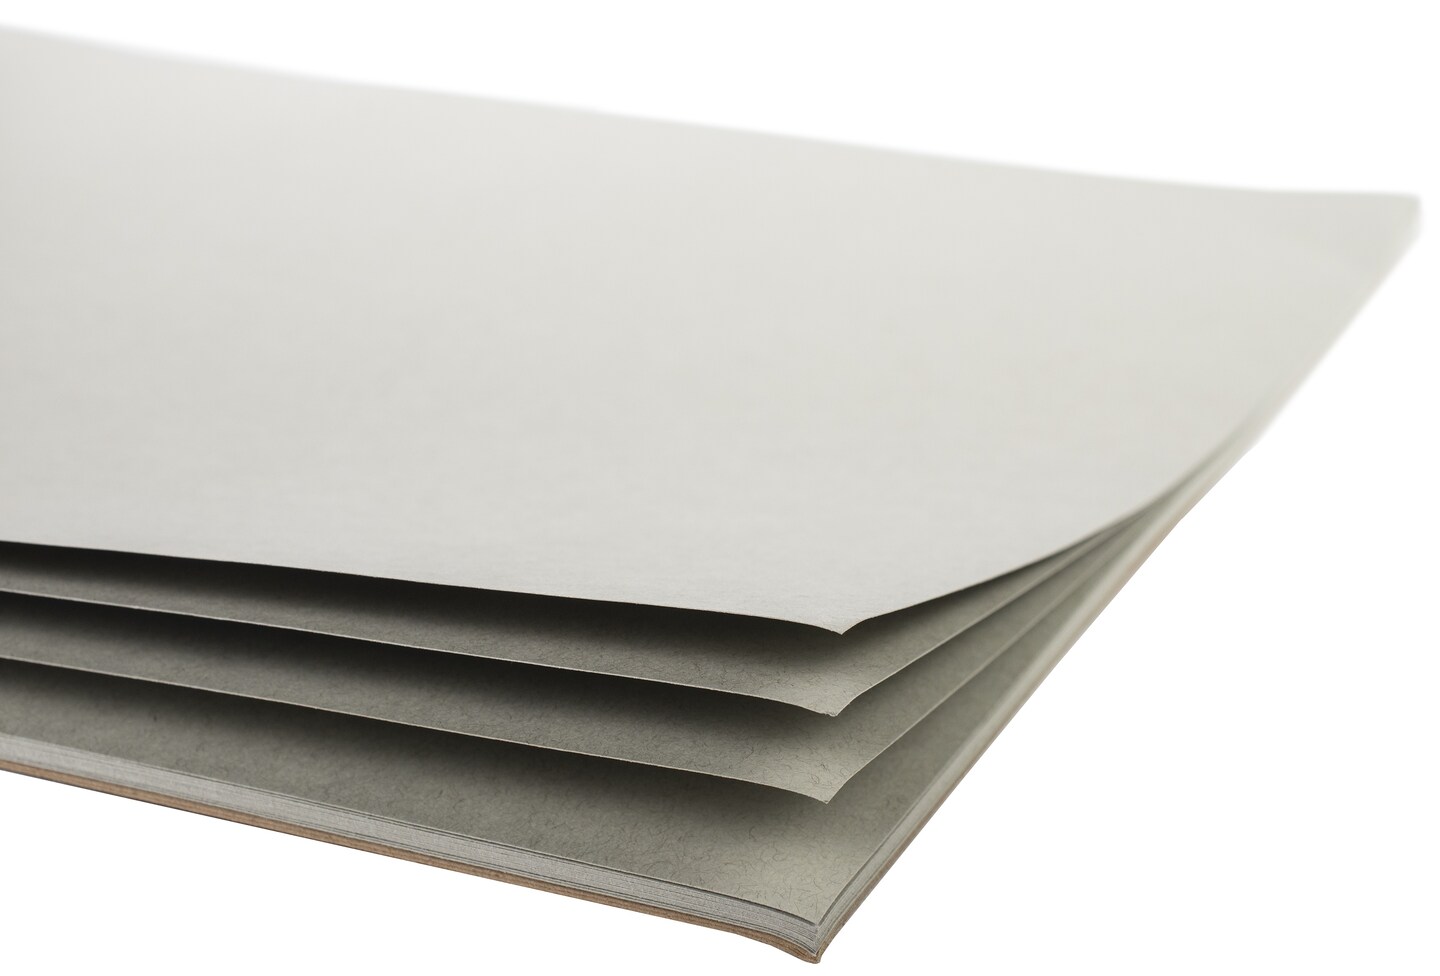 Strathmore Toned Sketch Paper Pad 18X24-80lb Toned Gray 24 Sheets